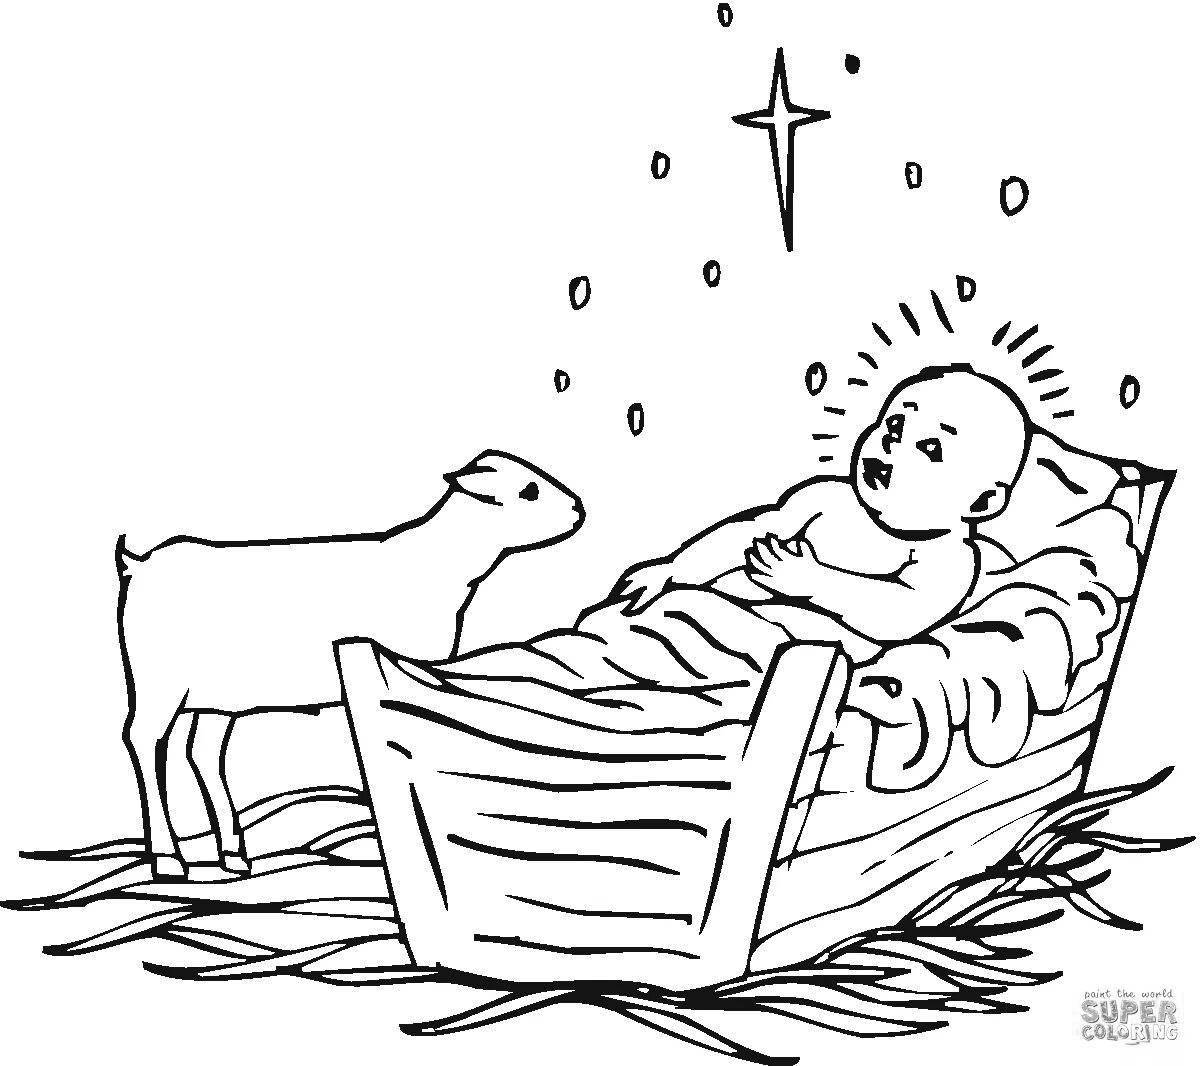 Coloring page the birth of jesus christ in luxury